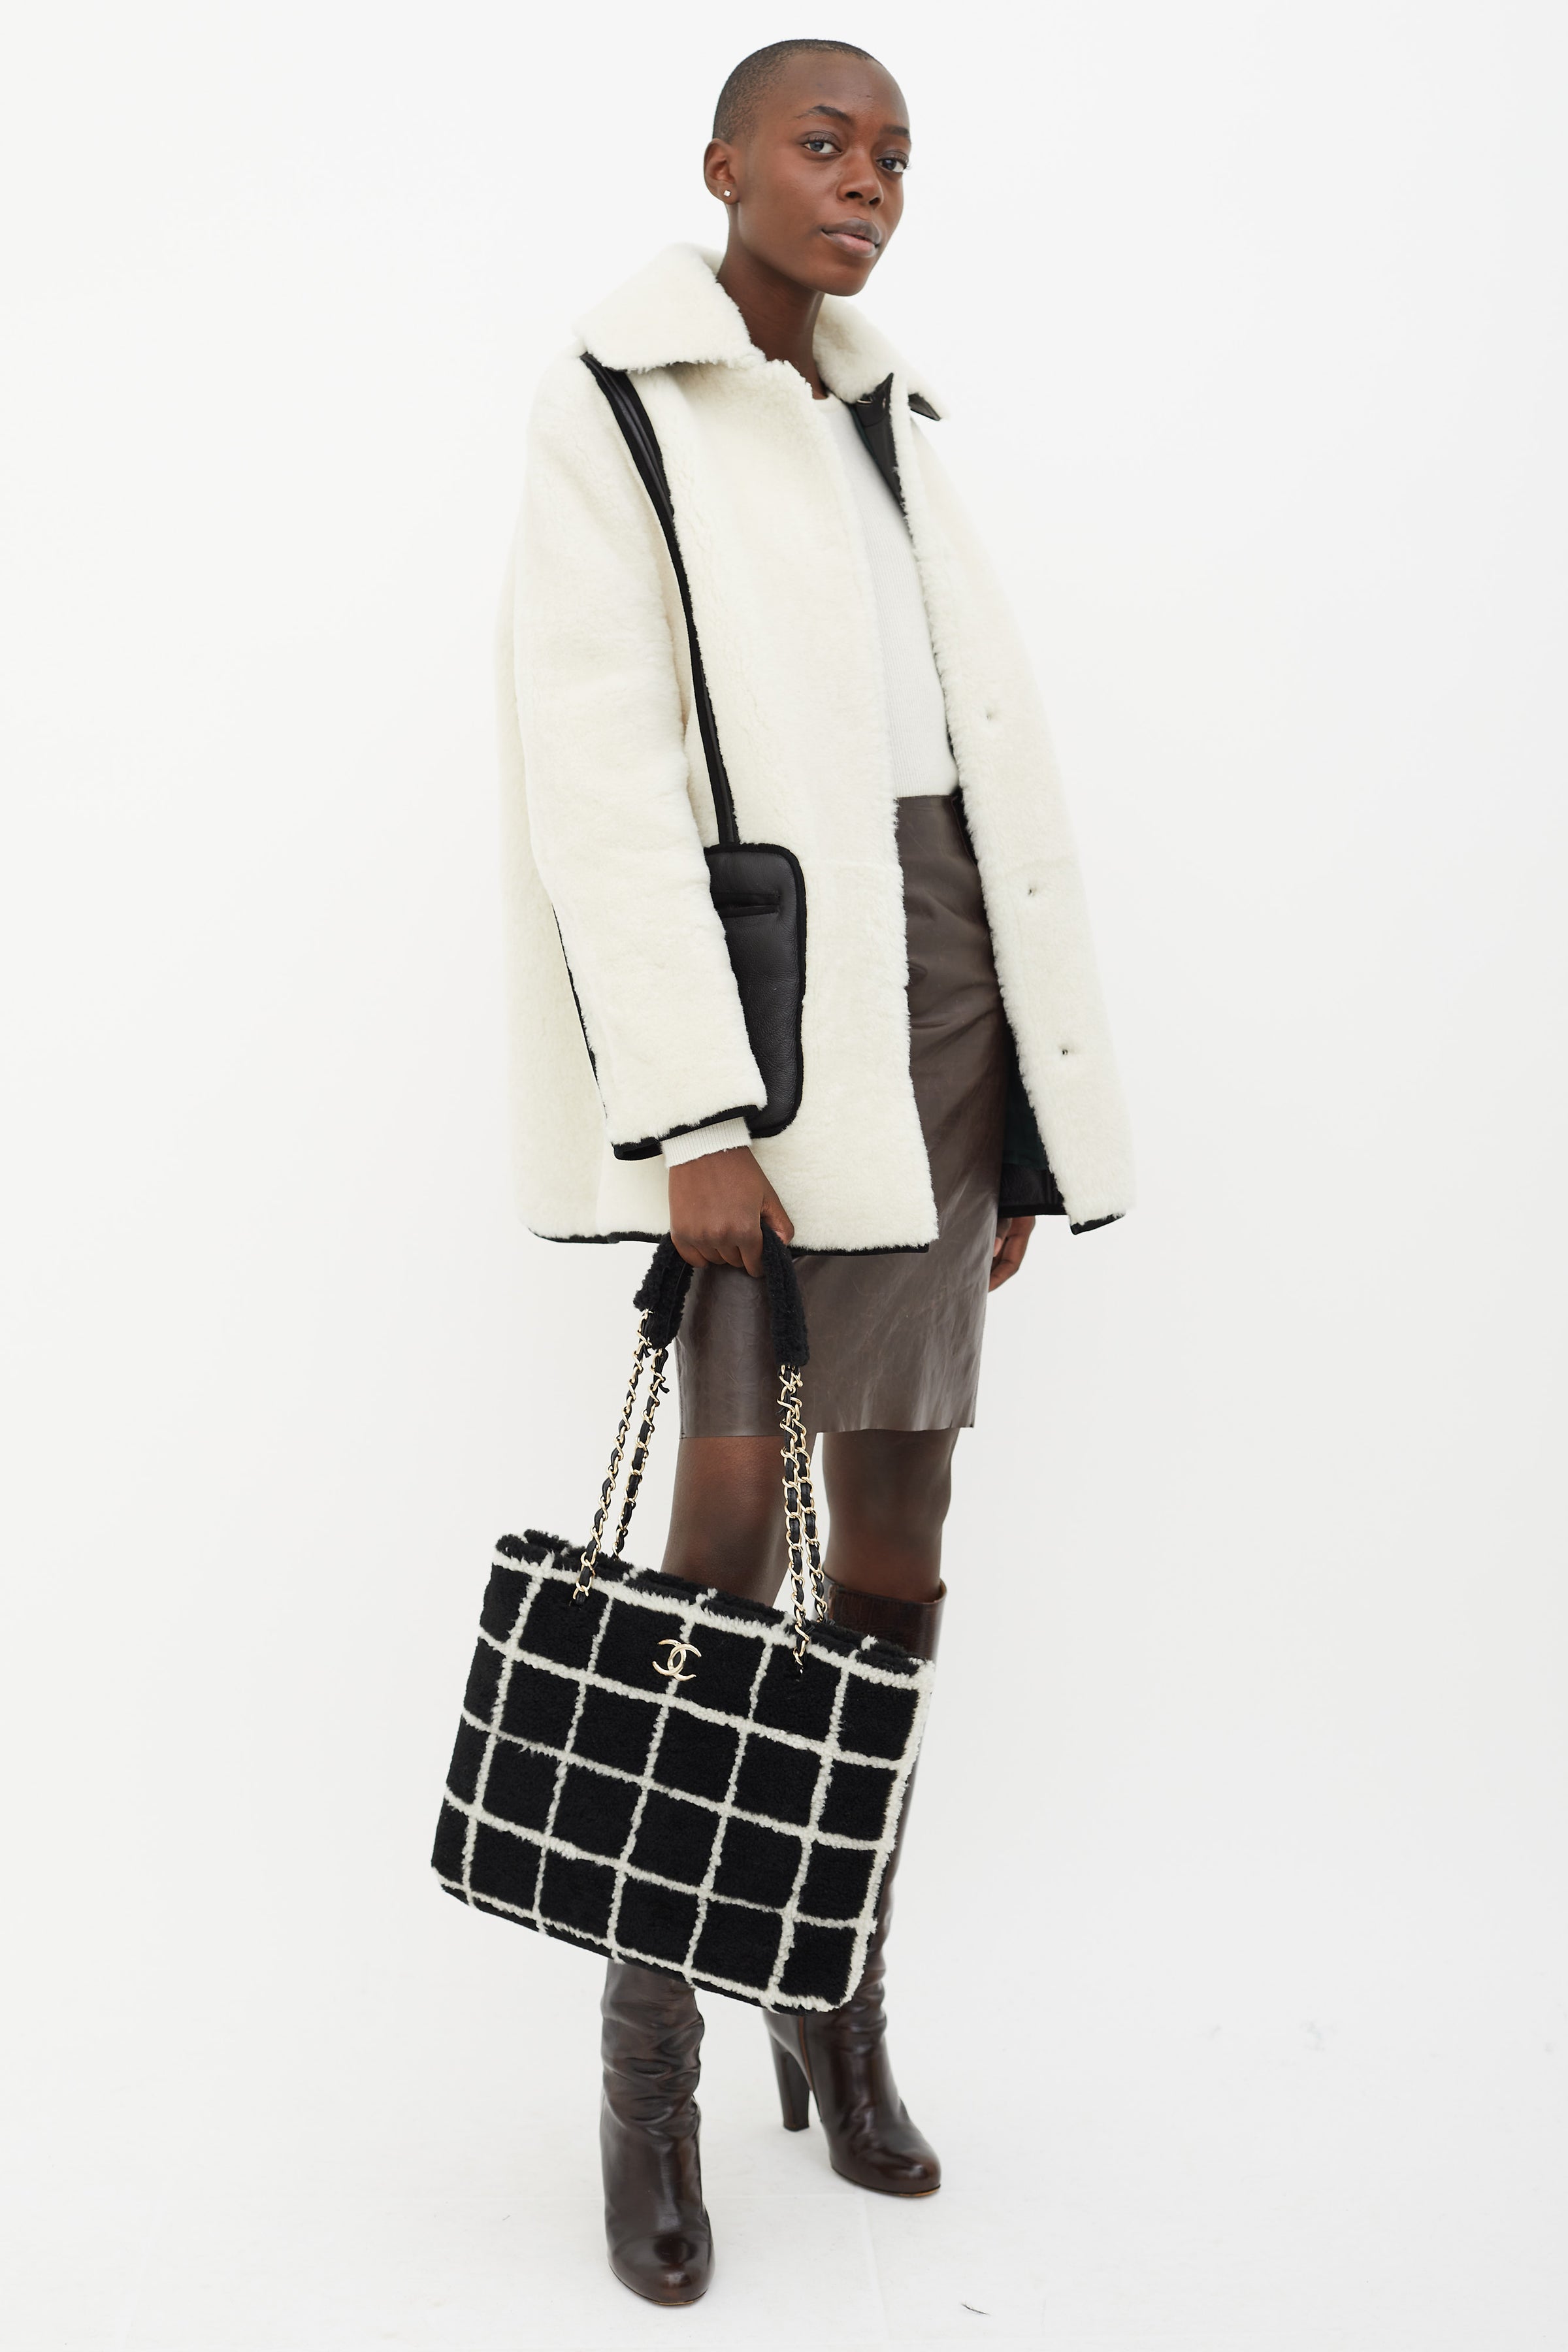 Chanel // Black & White Shearling Grid Tote – VSP Consignment